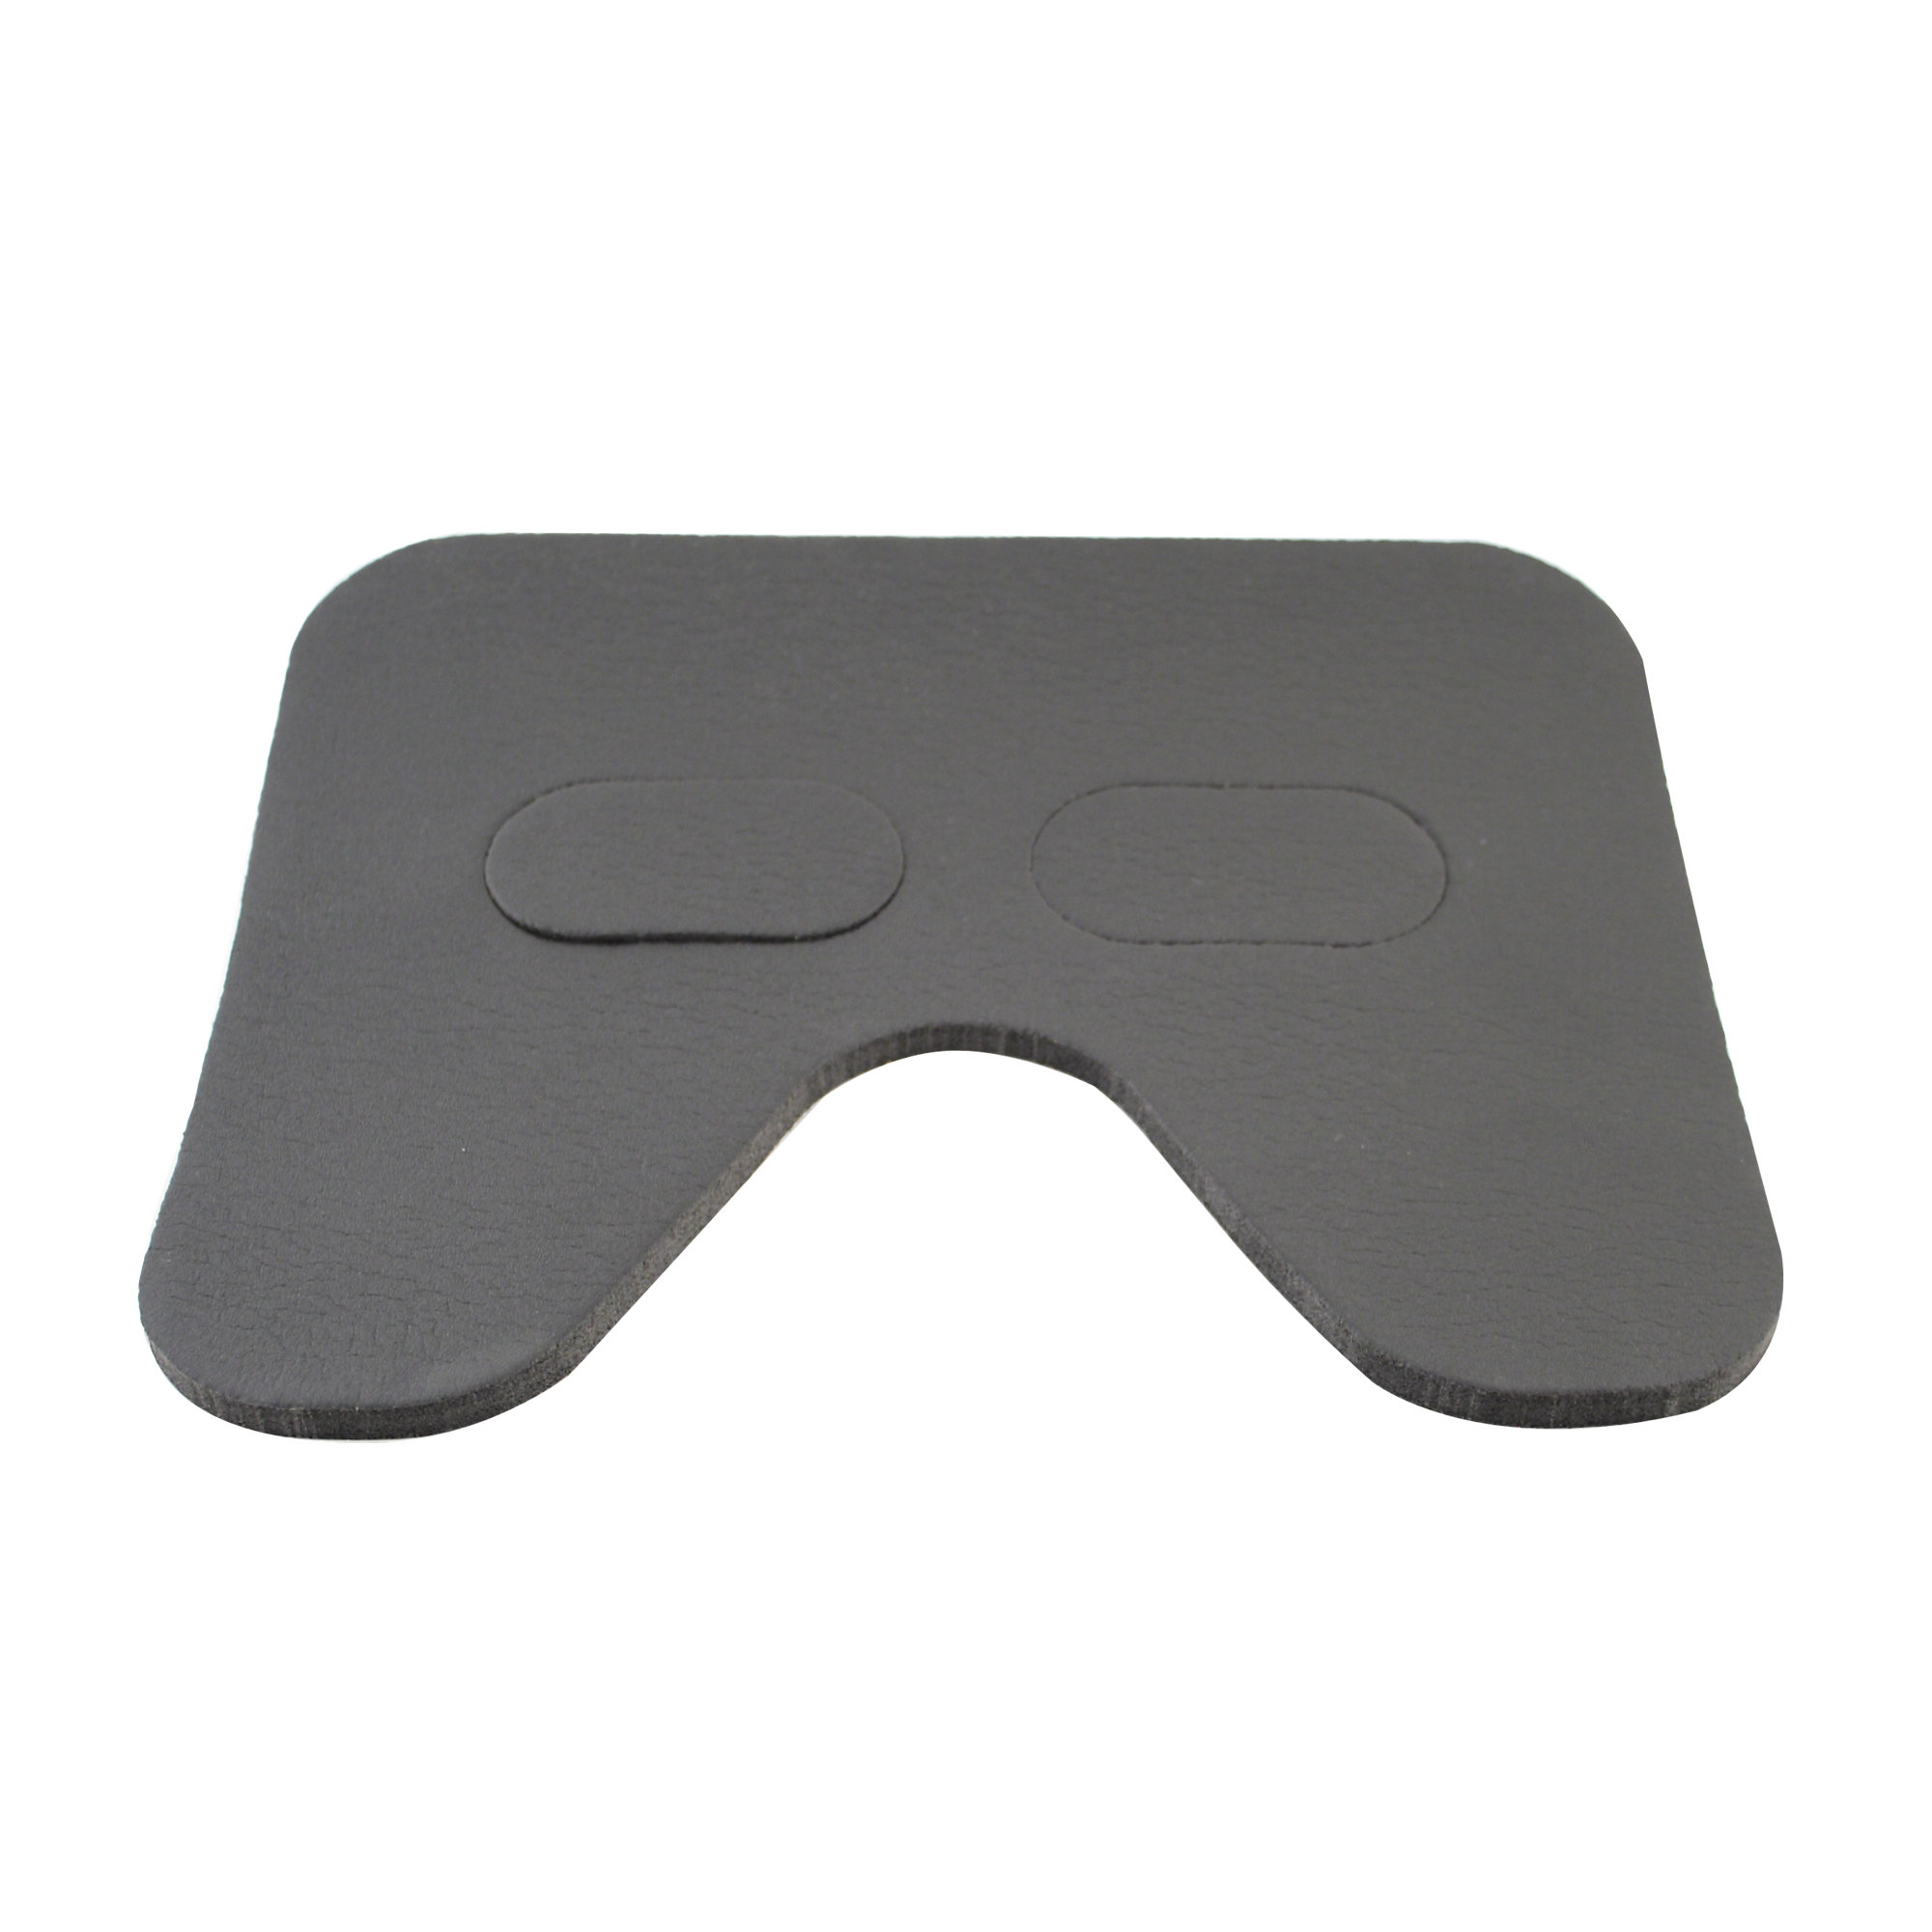 Foam Seat Pad for Concept 2 Rowers | 3/8" Thick